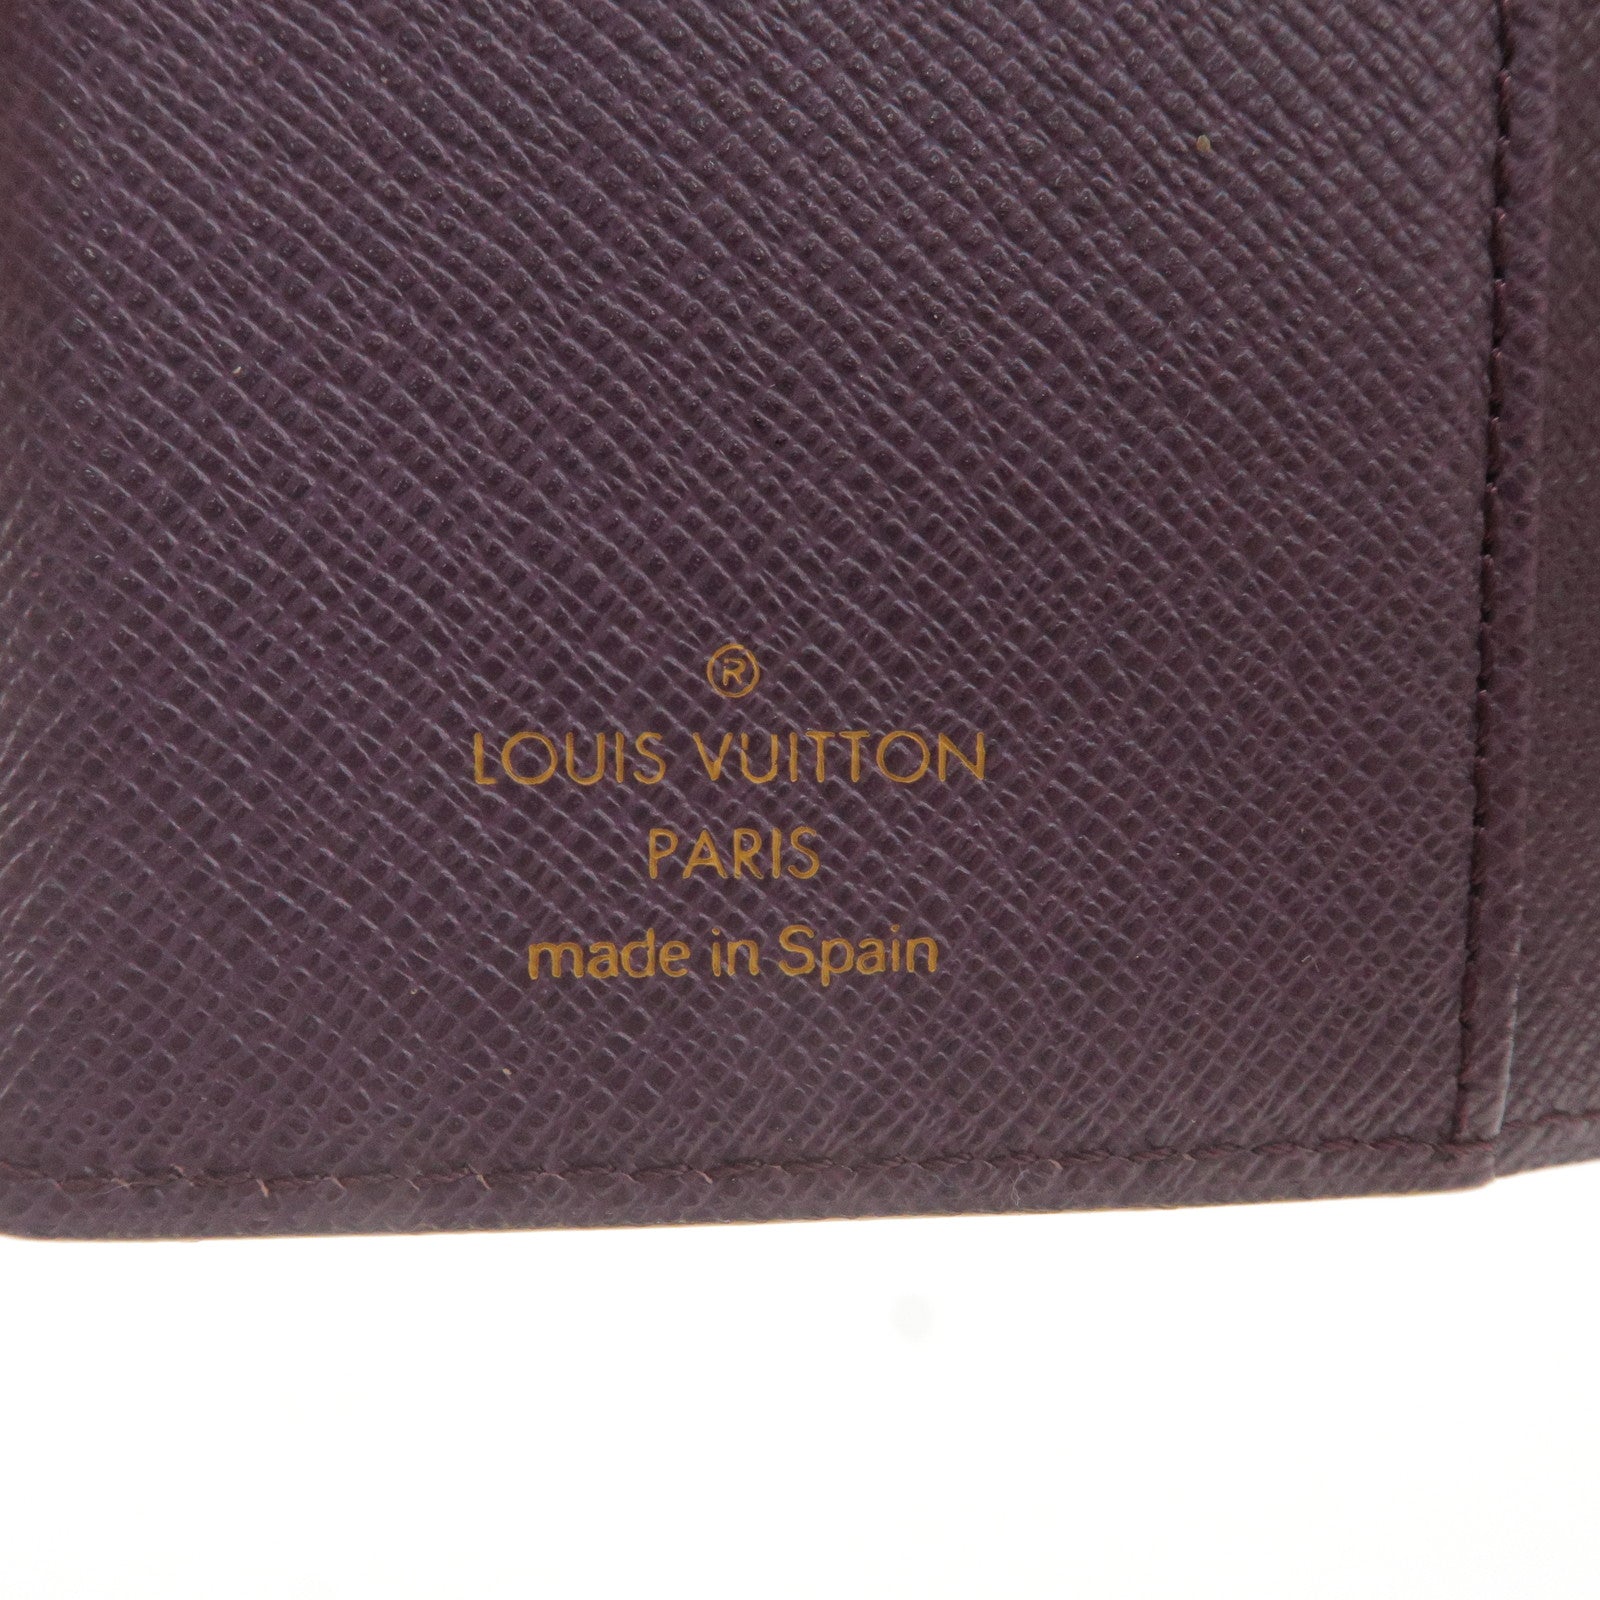 louis vuitton used authentic